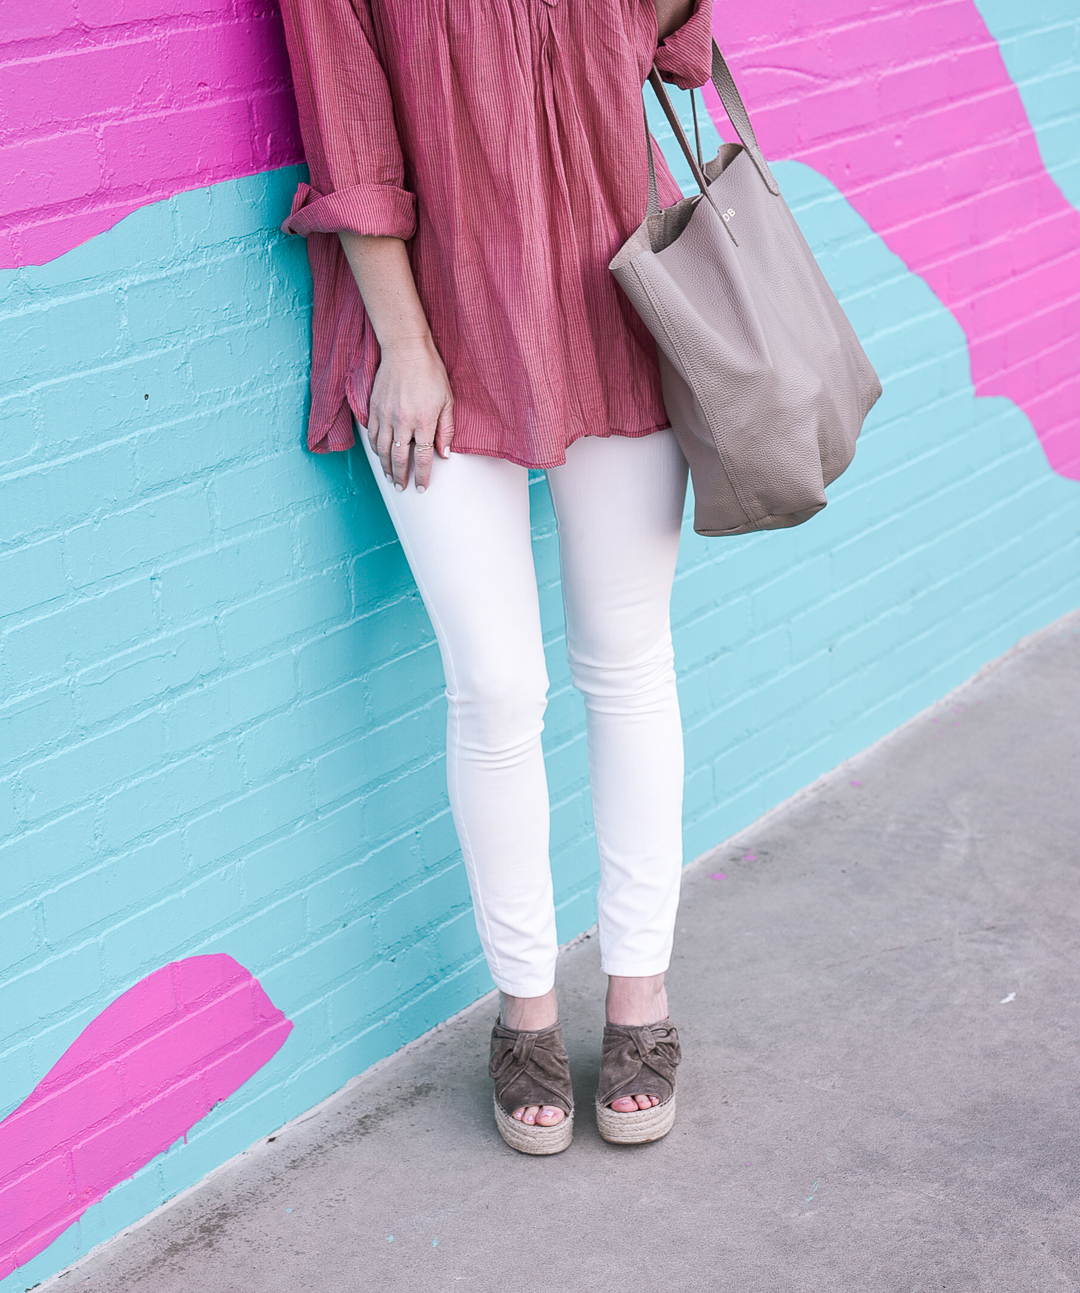 Taupe bow espadrille wedges by Marc Fisher.